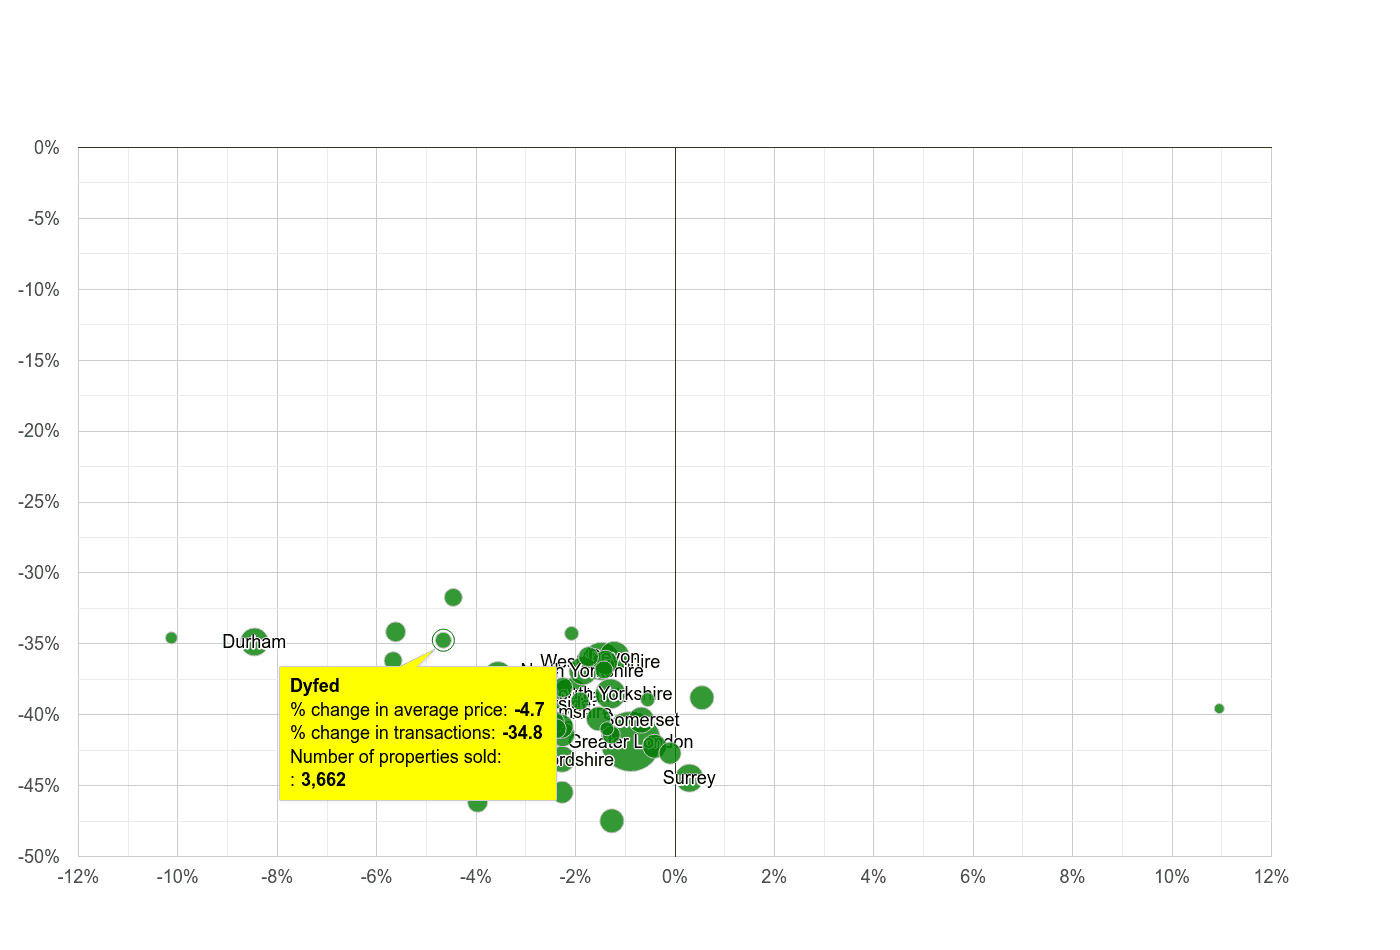 Dyfed property price and sales volume change relative to other counties